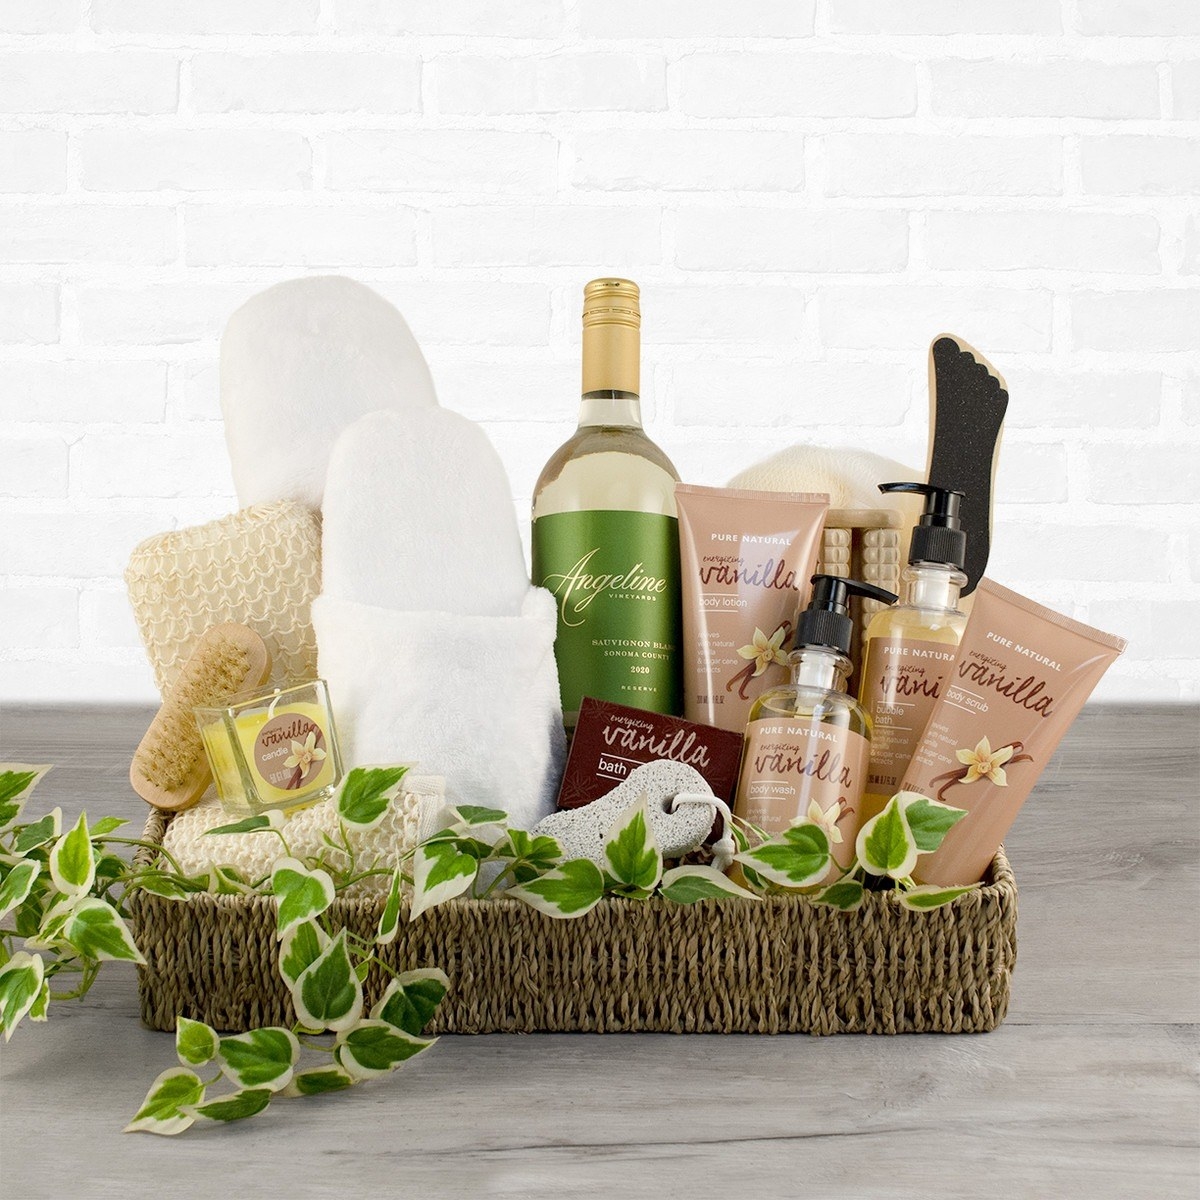 FOR THE HOME BOX | Toronto Gift Boxes & Gift Baskets – Present Day